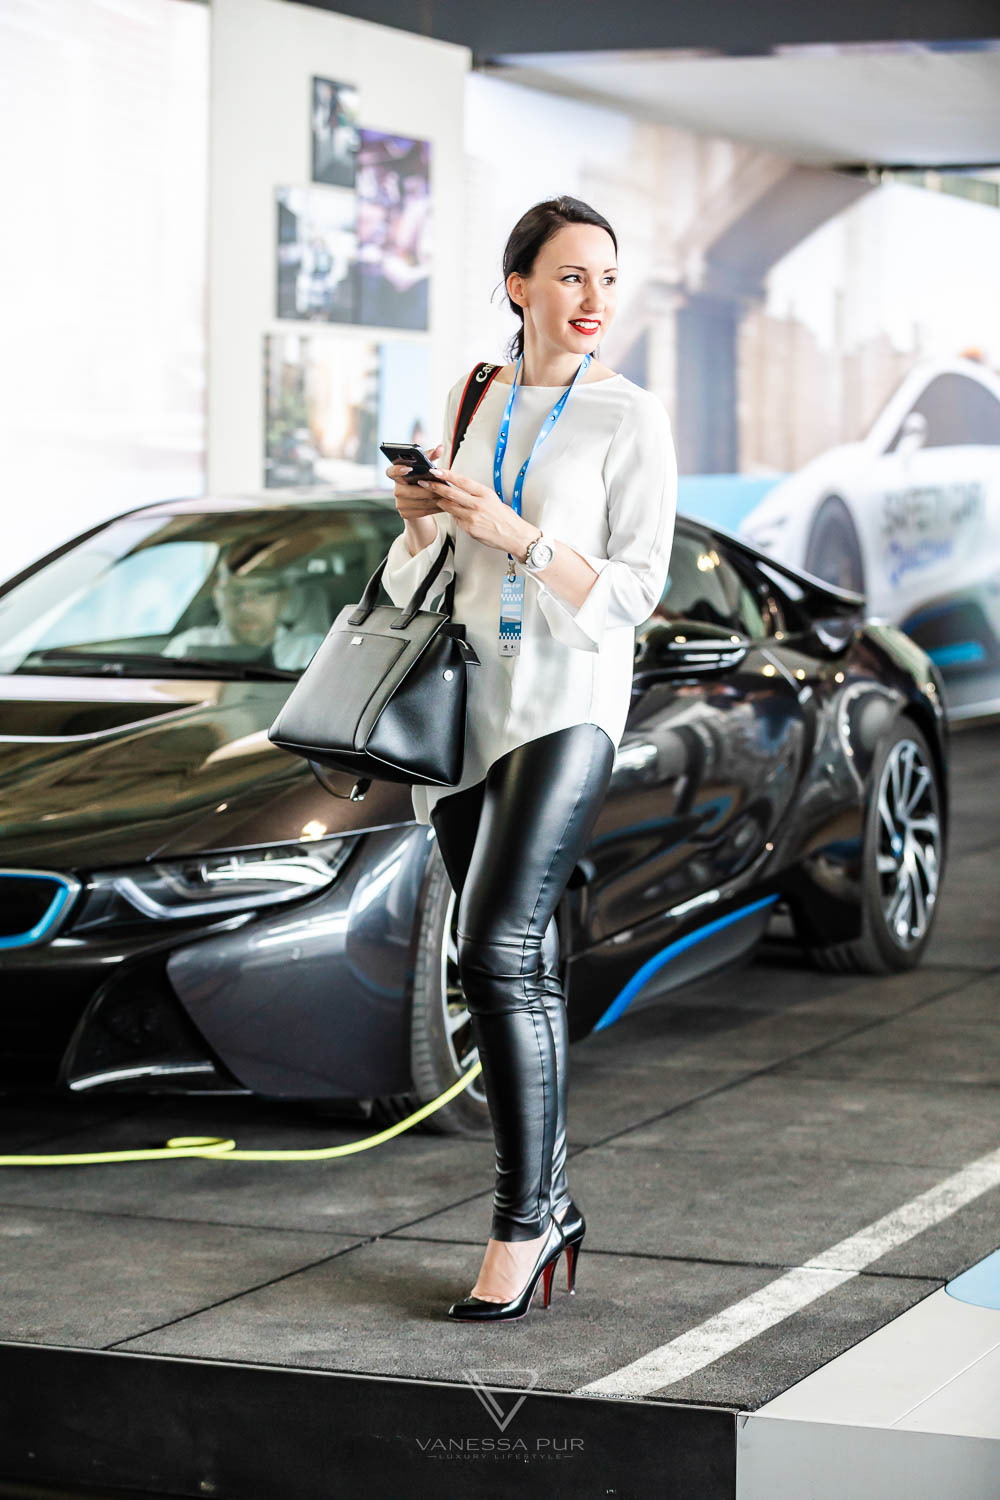 Vanessa Pur BMW i8 driving experience on the Formula E race track in Berlin - Race Track & Driving Experience - HarmanKardon GetElectrified Formula E Grand Prix Berlin - BMW Motorsport Event and Driving Experience with BMW i8 ECar